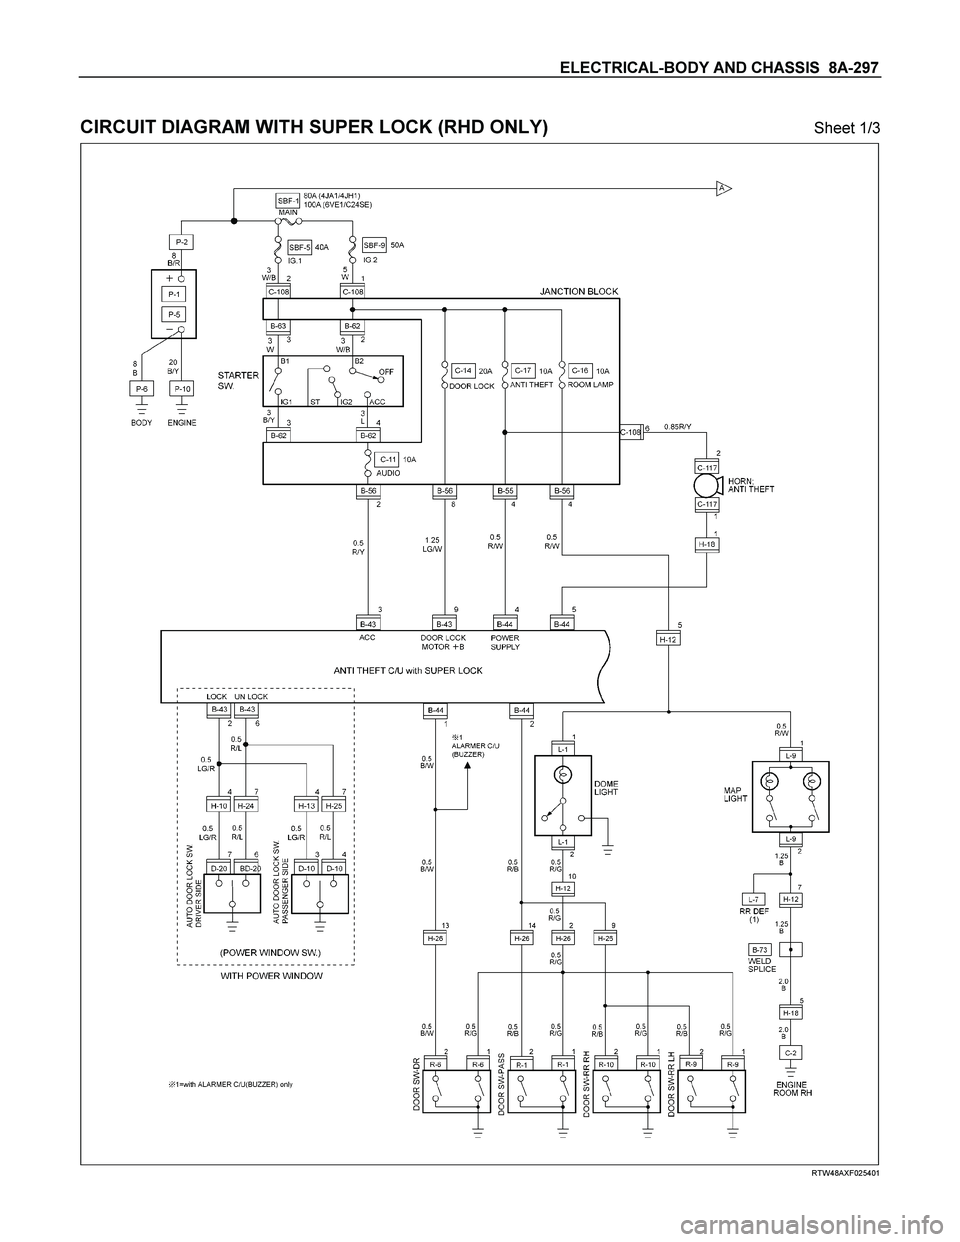 ISUZU TF SERIES 2004  Workshop Manual ELECTRICAL-BODY AND CHASSIS  8A-297 
 
CIRCUIT DIAGRAM WITH SUPER LOCK (RHD ONLY) Sheet 1/3 
  
 
 
 
RTW48AXF025401  